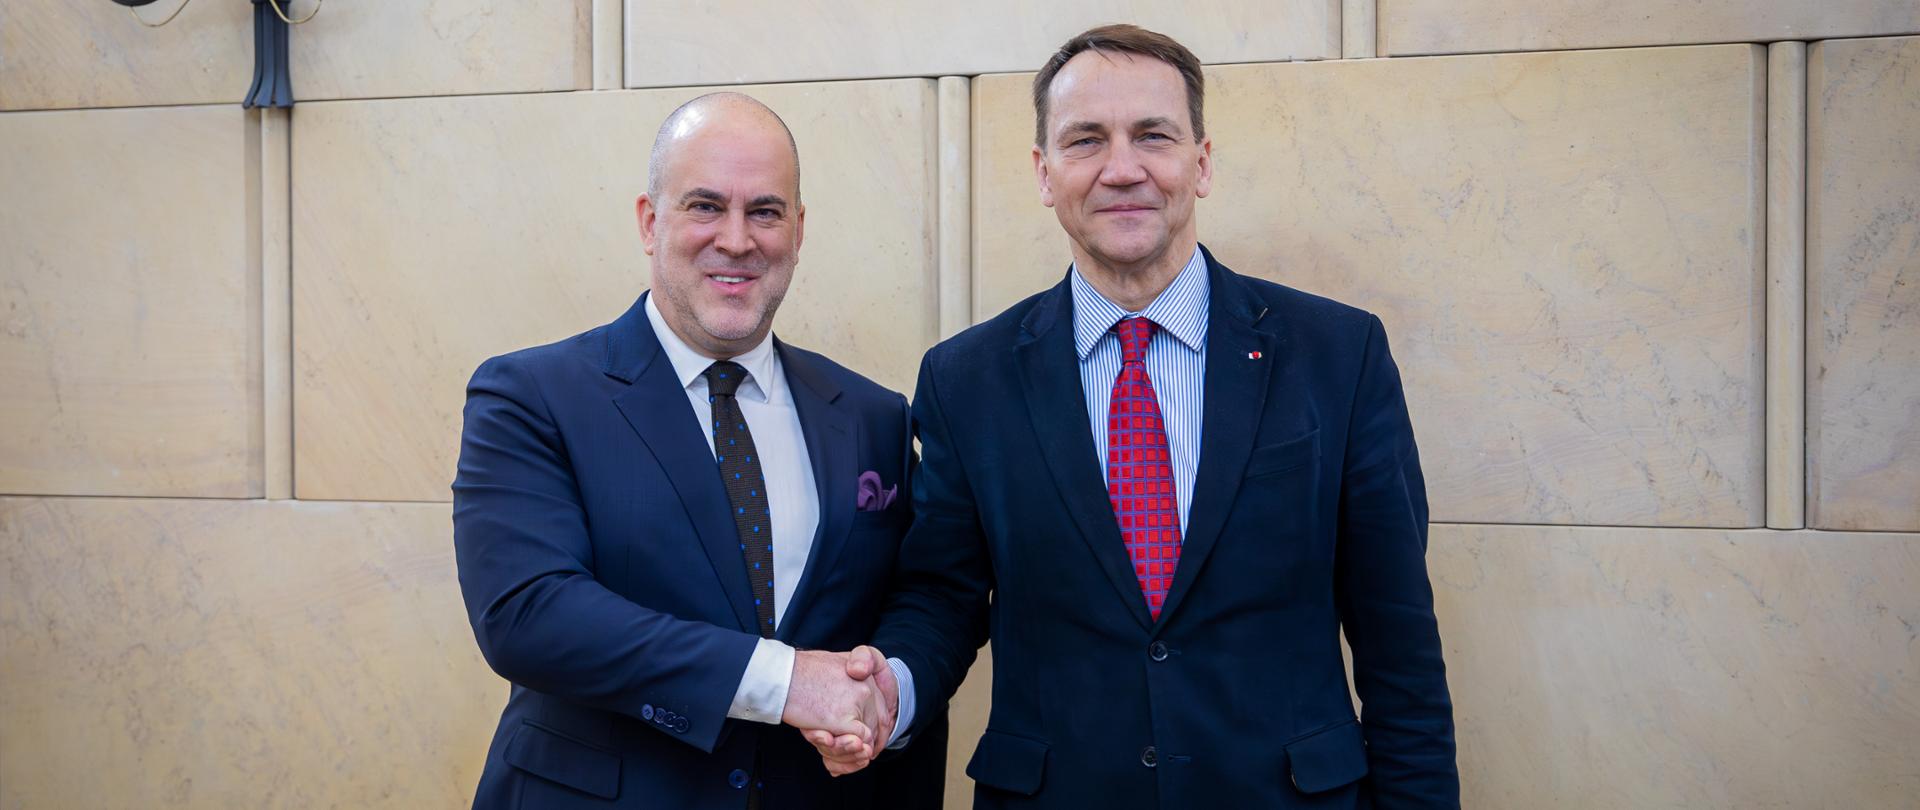 Minister of Foreign Affairs Radosław Sikorski and Head of the UNHCR Representation in Warsaw Kevin Allen